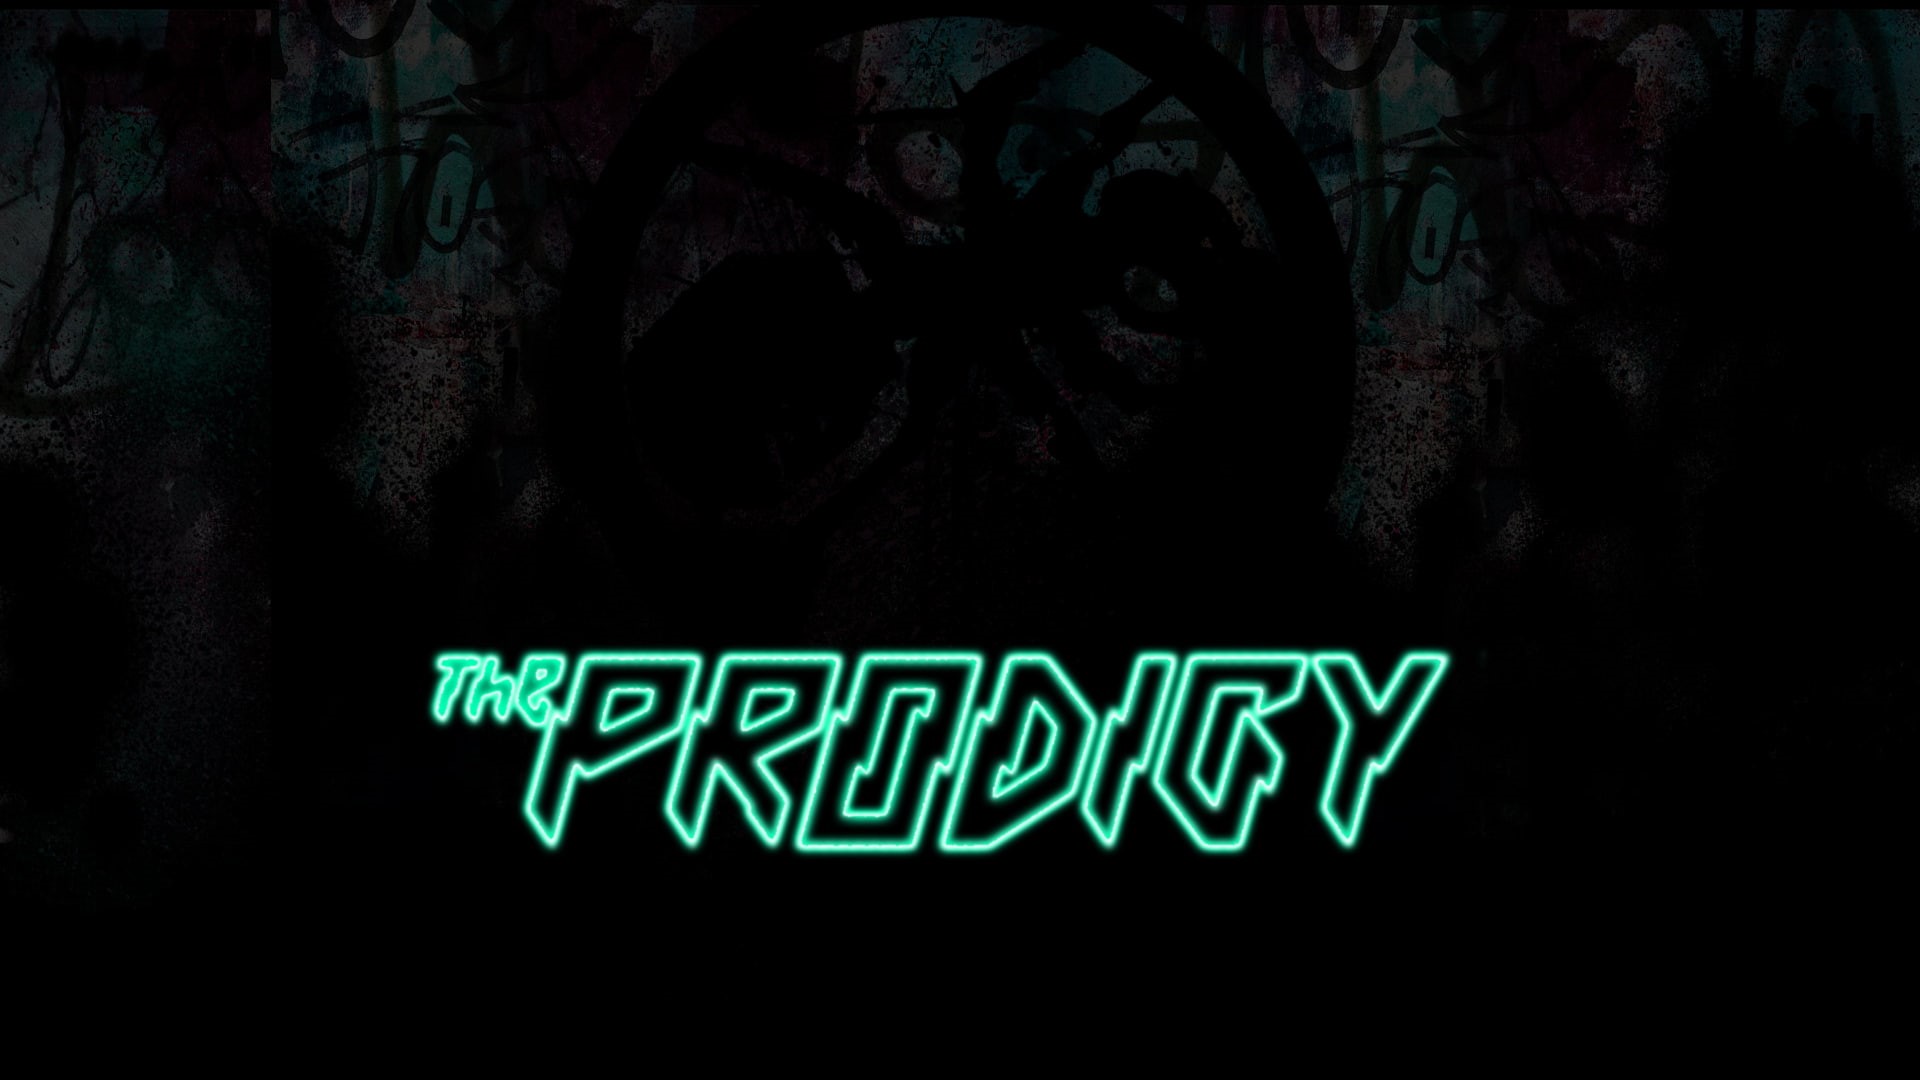 Wallpaper id p the prodigy free download